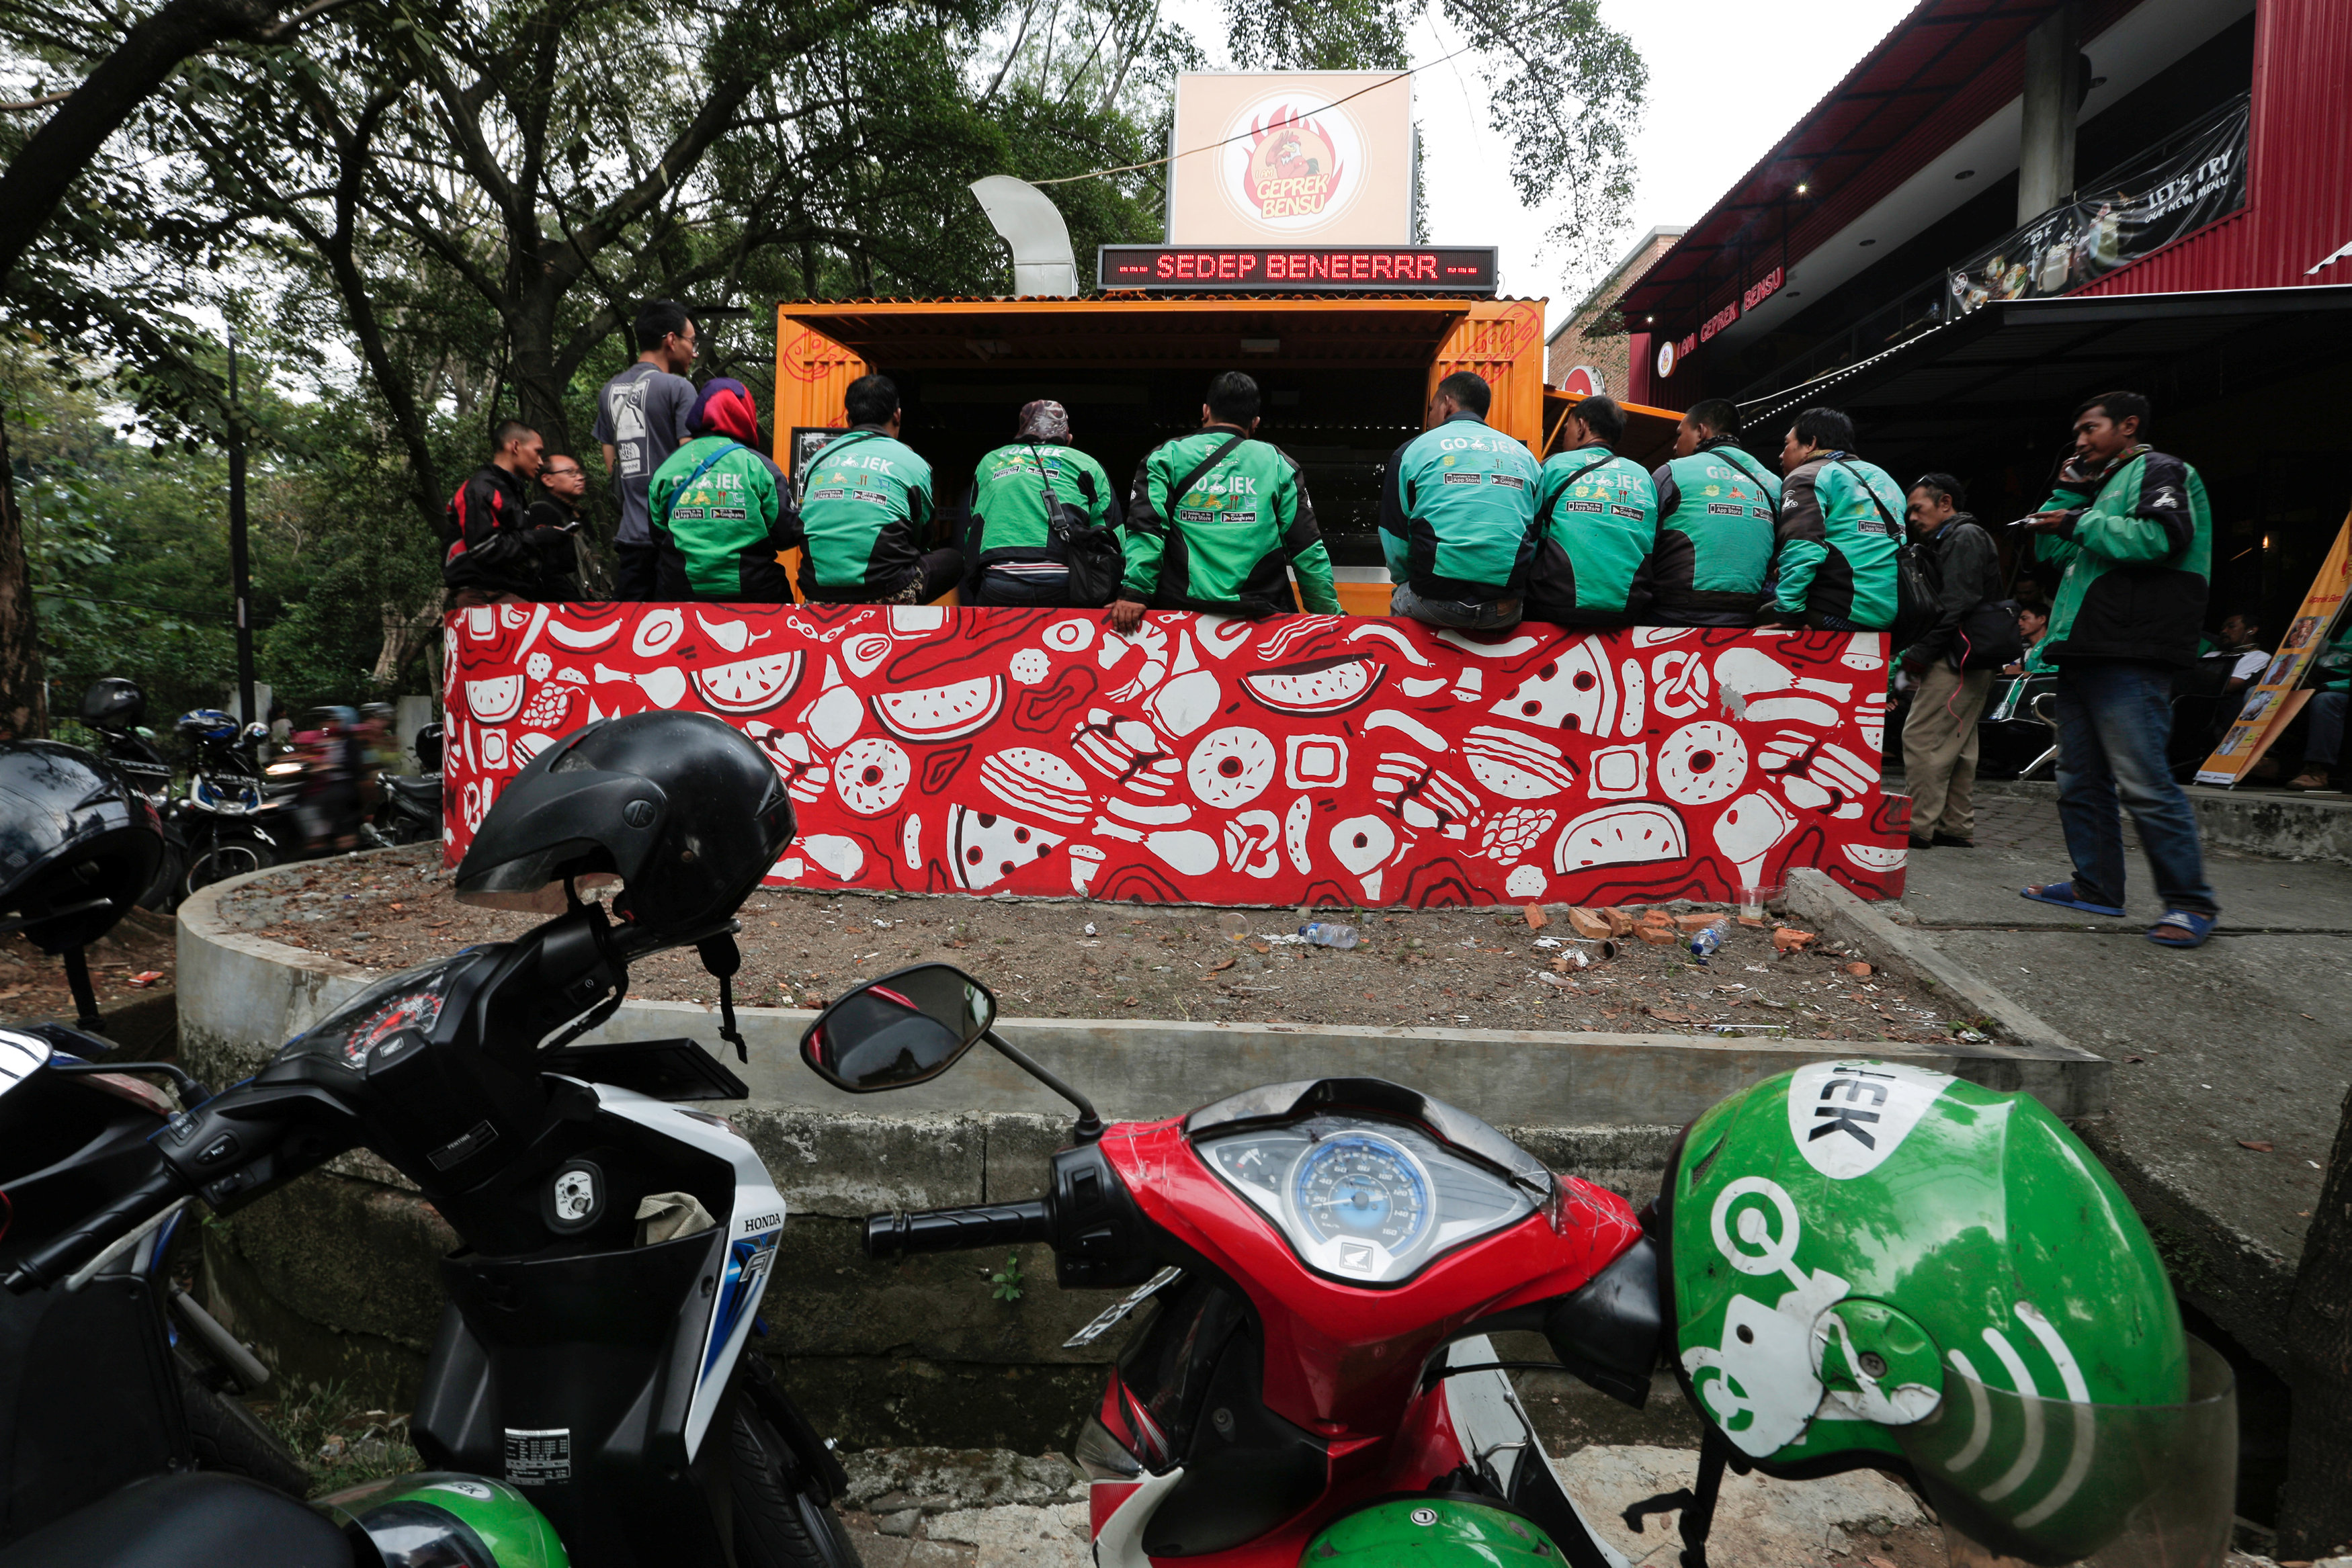 Jakarta's traffic-clogged economy gets a lift from motorbike deliveries